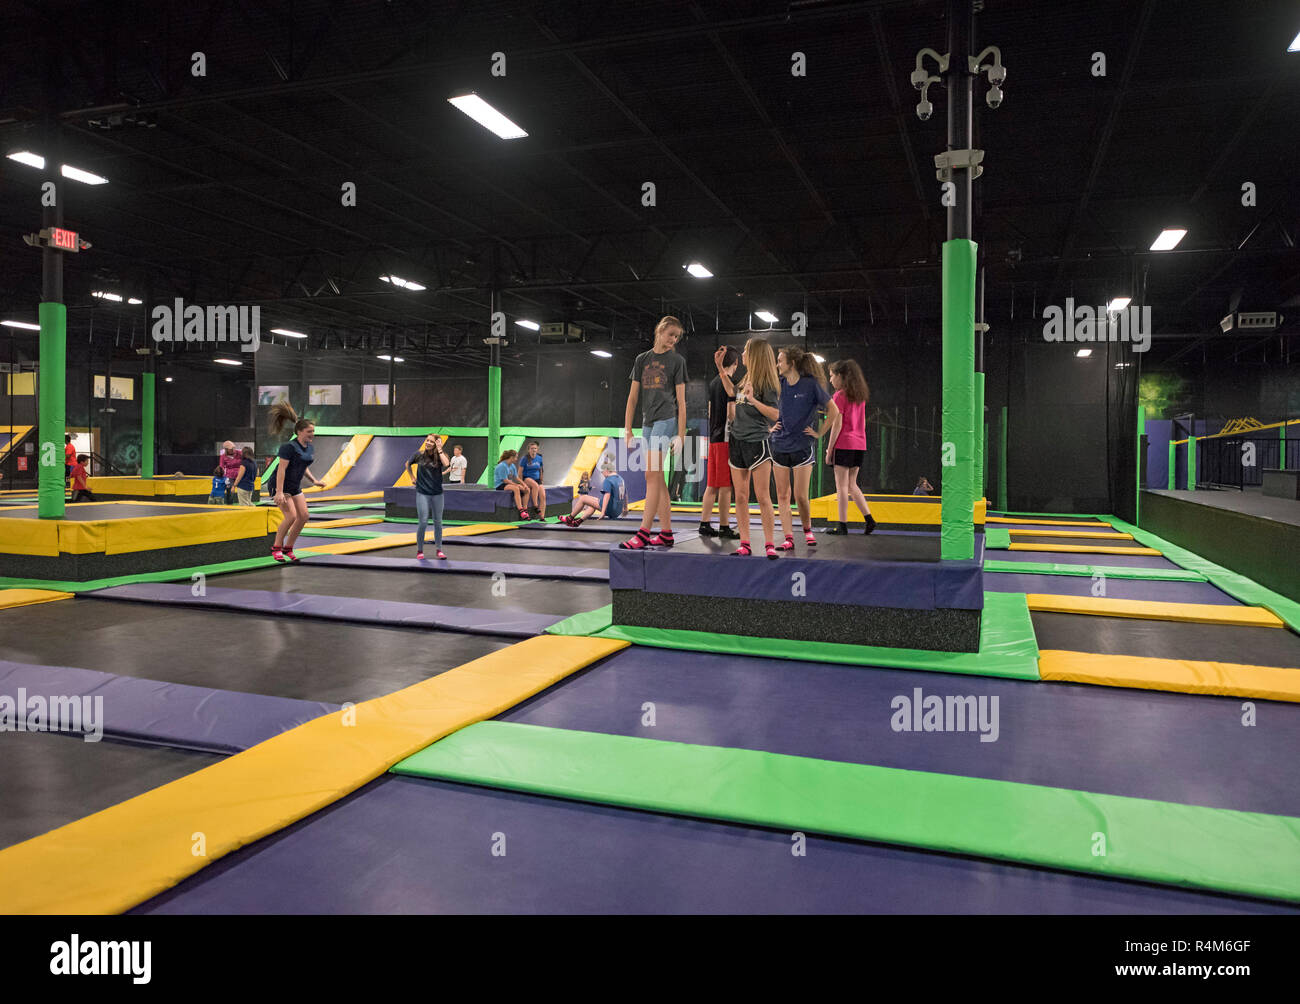 Trampoline Park High Resolution Stock Photography and Images - Alamy